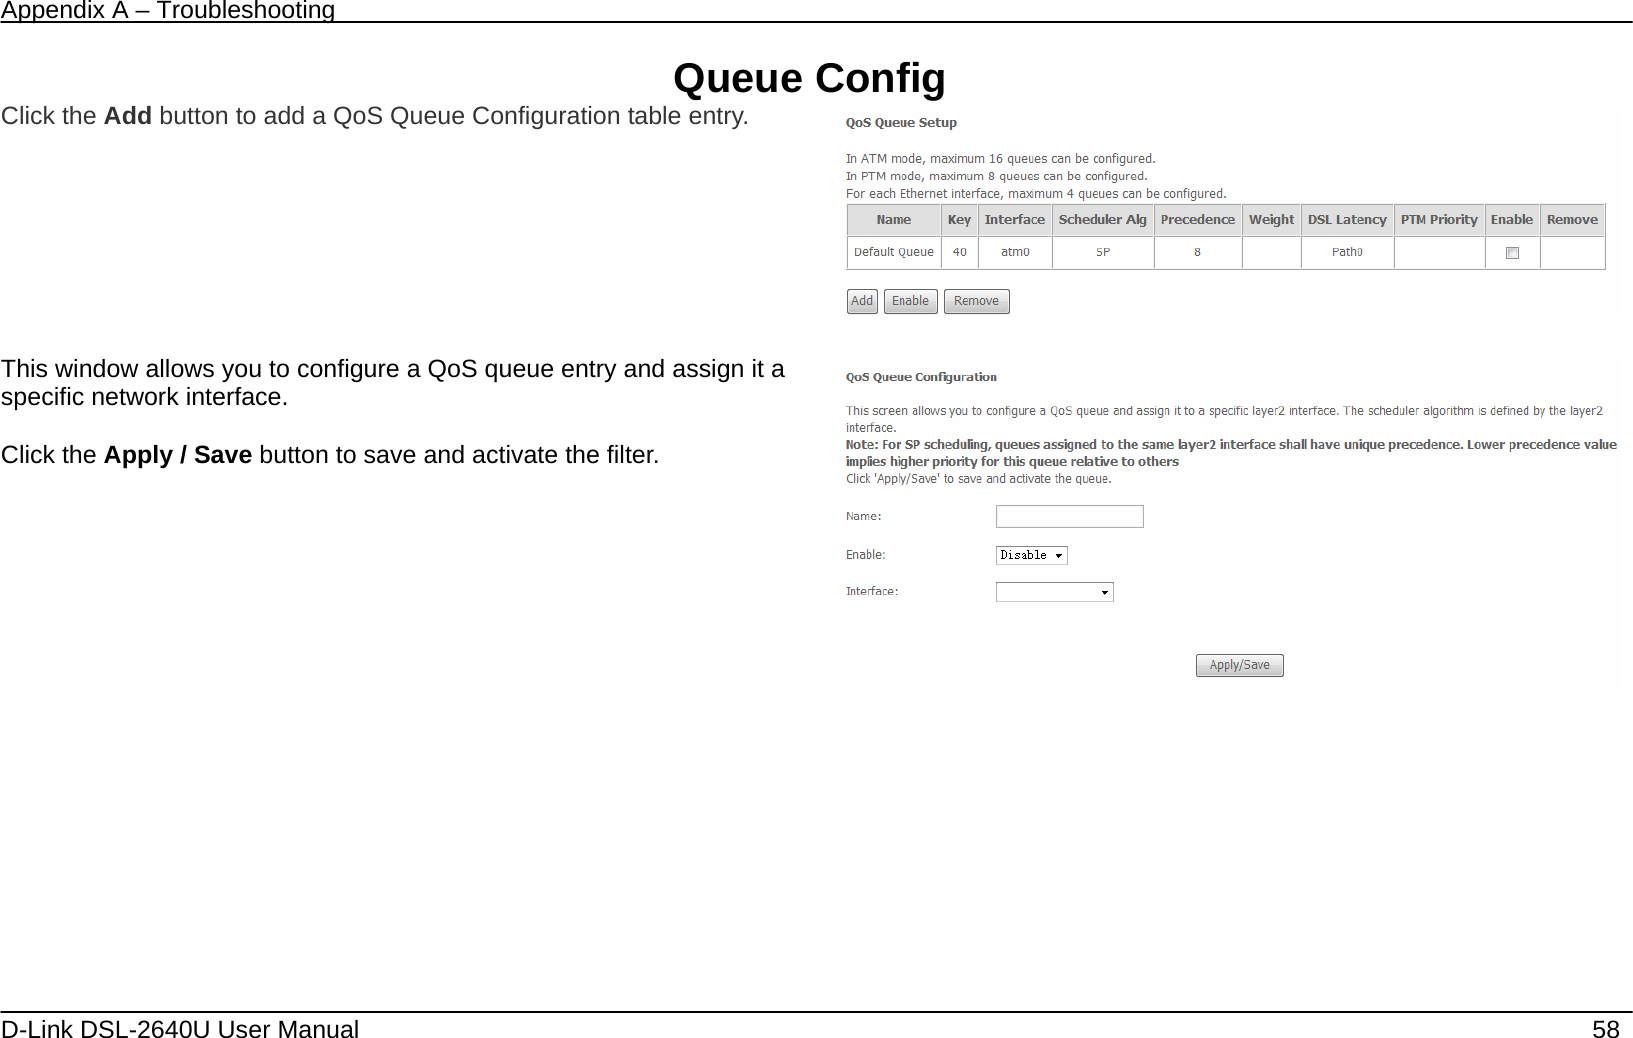 Appendix A – Troubleshooting   D-Link DSL-2640U User Manual    58 Queue Config Click the Add button to add a QoS Queue Configuration table entry.     This window allows you to configure a QoS queue entry and assign it a specific network interface.   Click the Apply / Save button to save and activate the filter.    